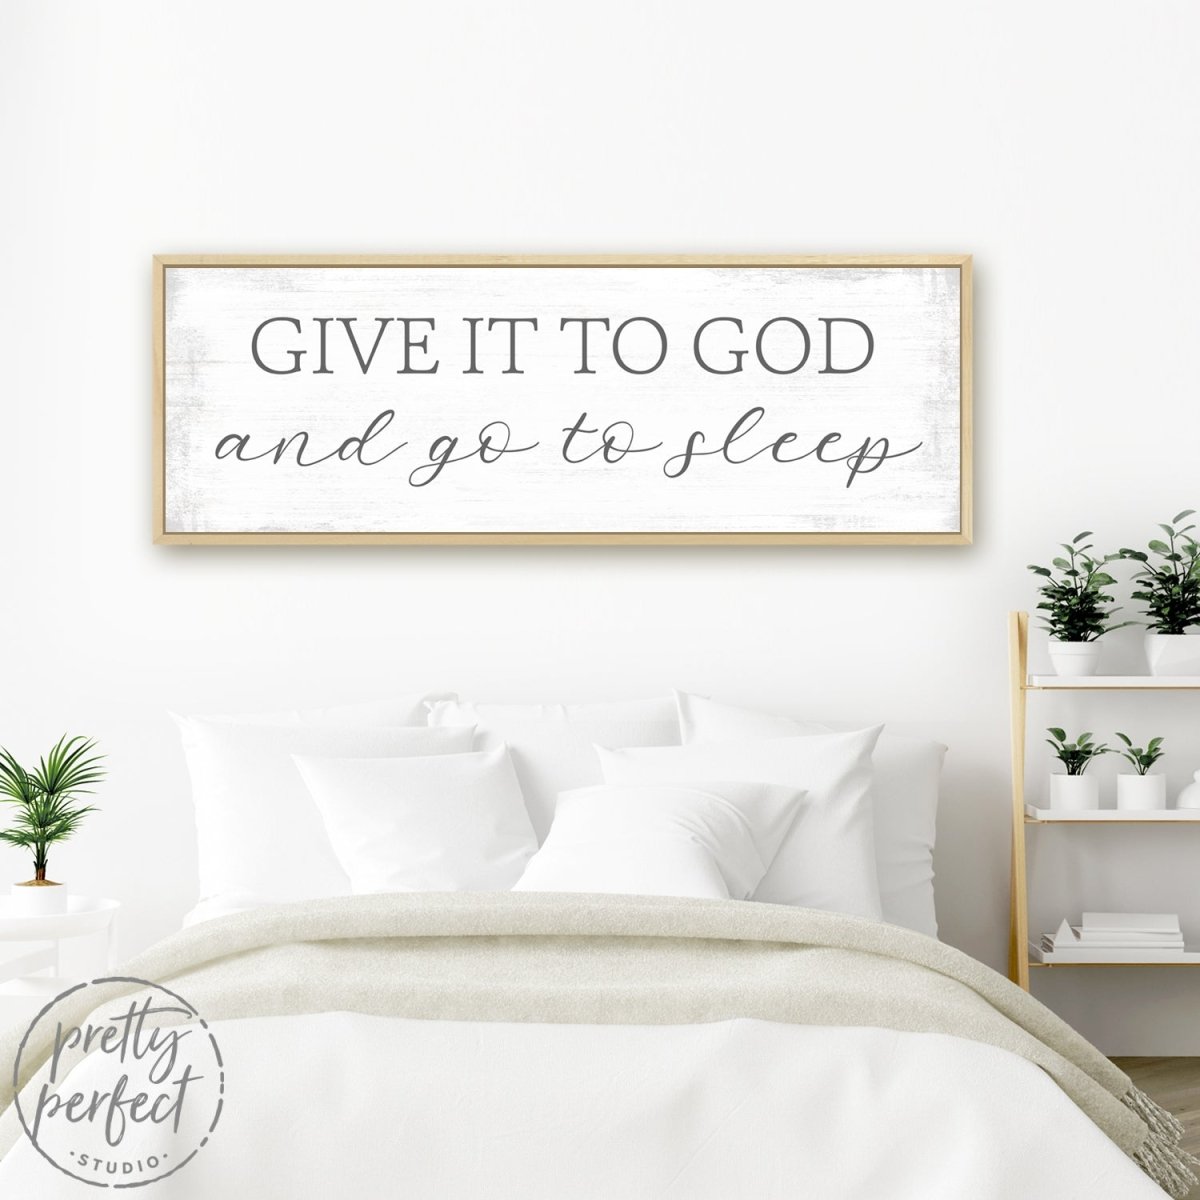 Give It To God and Go To Sleep Sign Above Bed In Master Bedroom - Pretty Perfect Studio